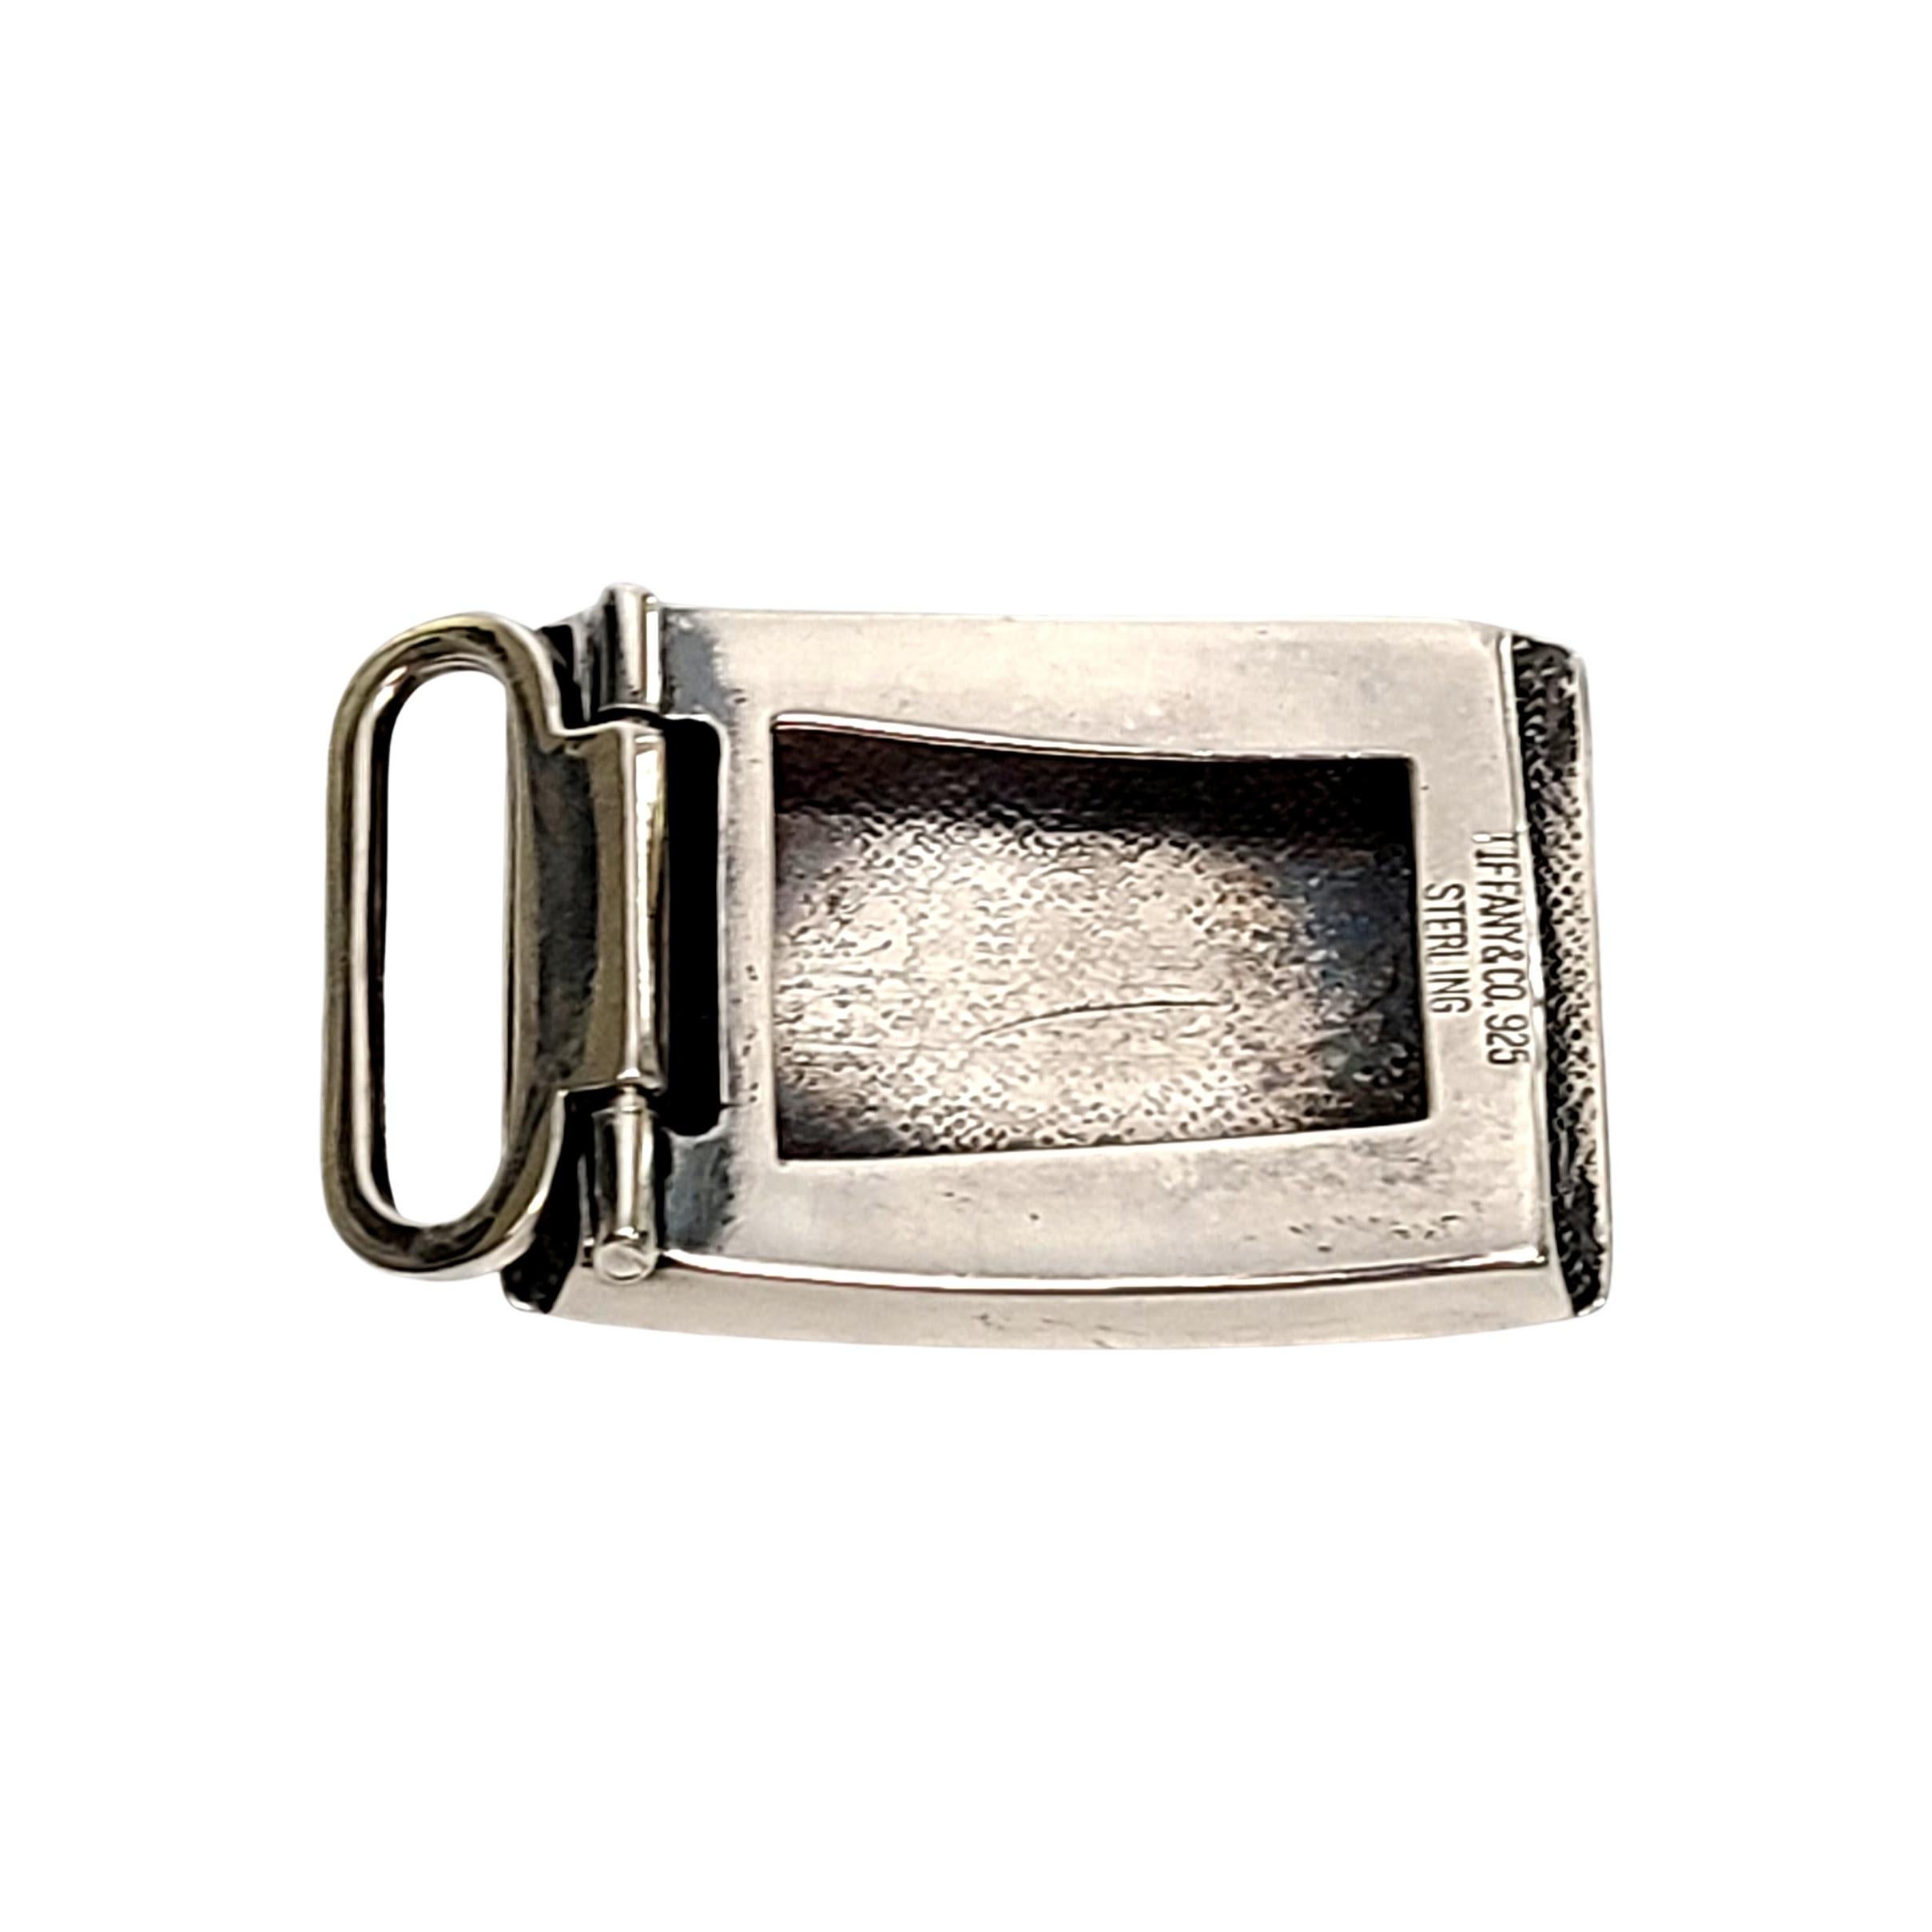 Sterling silver belt bucke by Tiffany & Co.

No monogram.

Rectangle shaped sterling silver belt buckle with etched stripe design framing the buckle. There had been a monogram at the center, which has been removed. As a result there is some waving